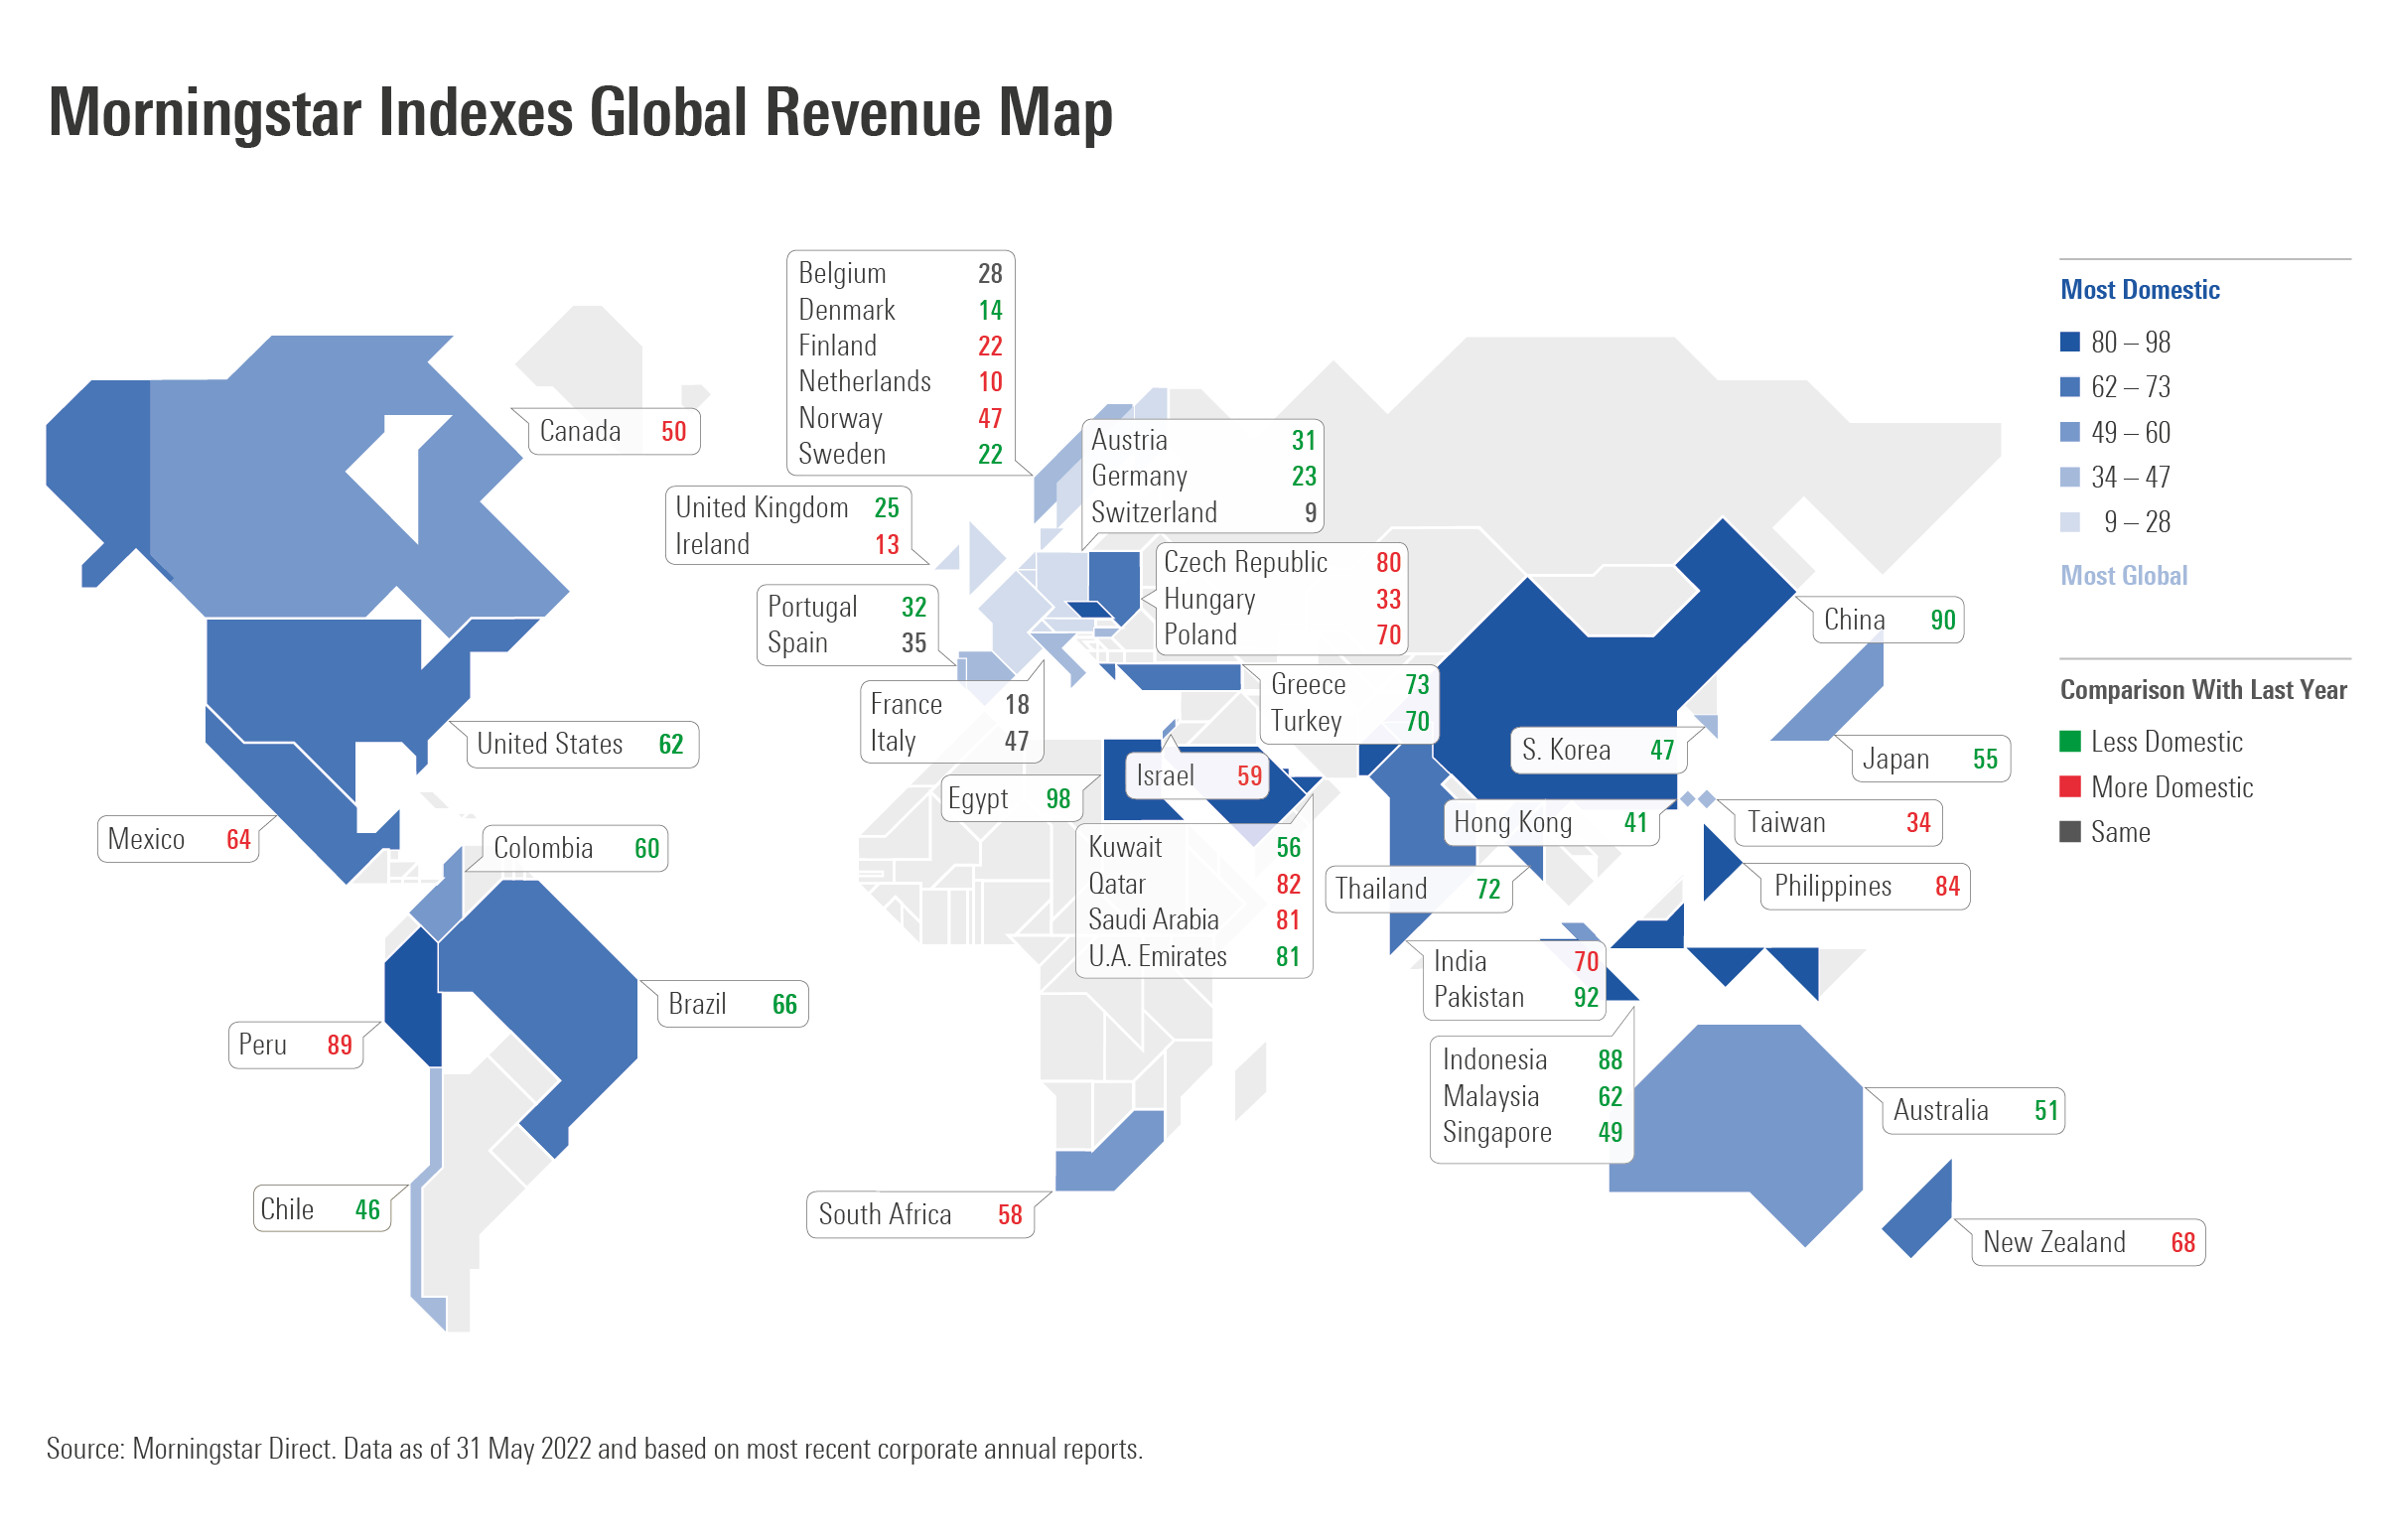 A global map indicating whether countries' revenue sources are more global or more domestic.